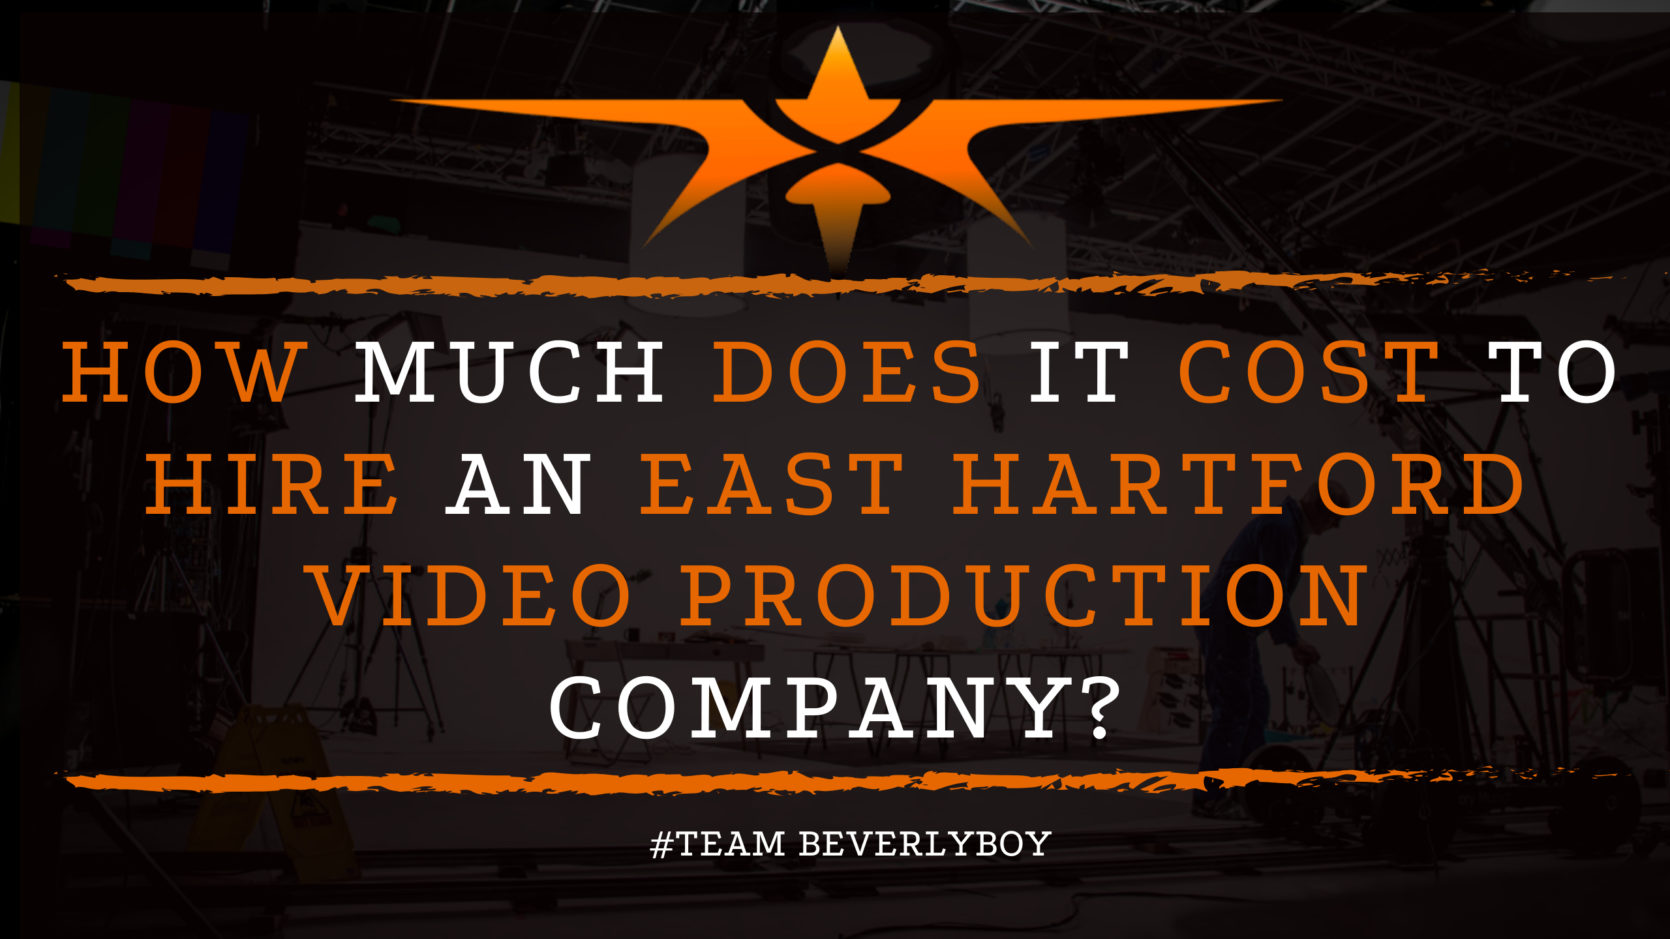 How Much Does It Cost to Hire an East Hartford Video Production Company?